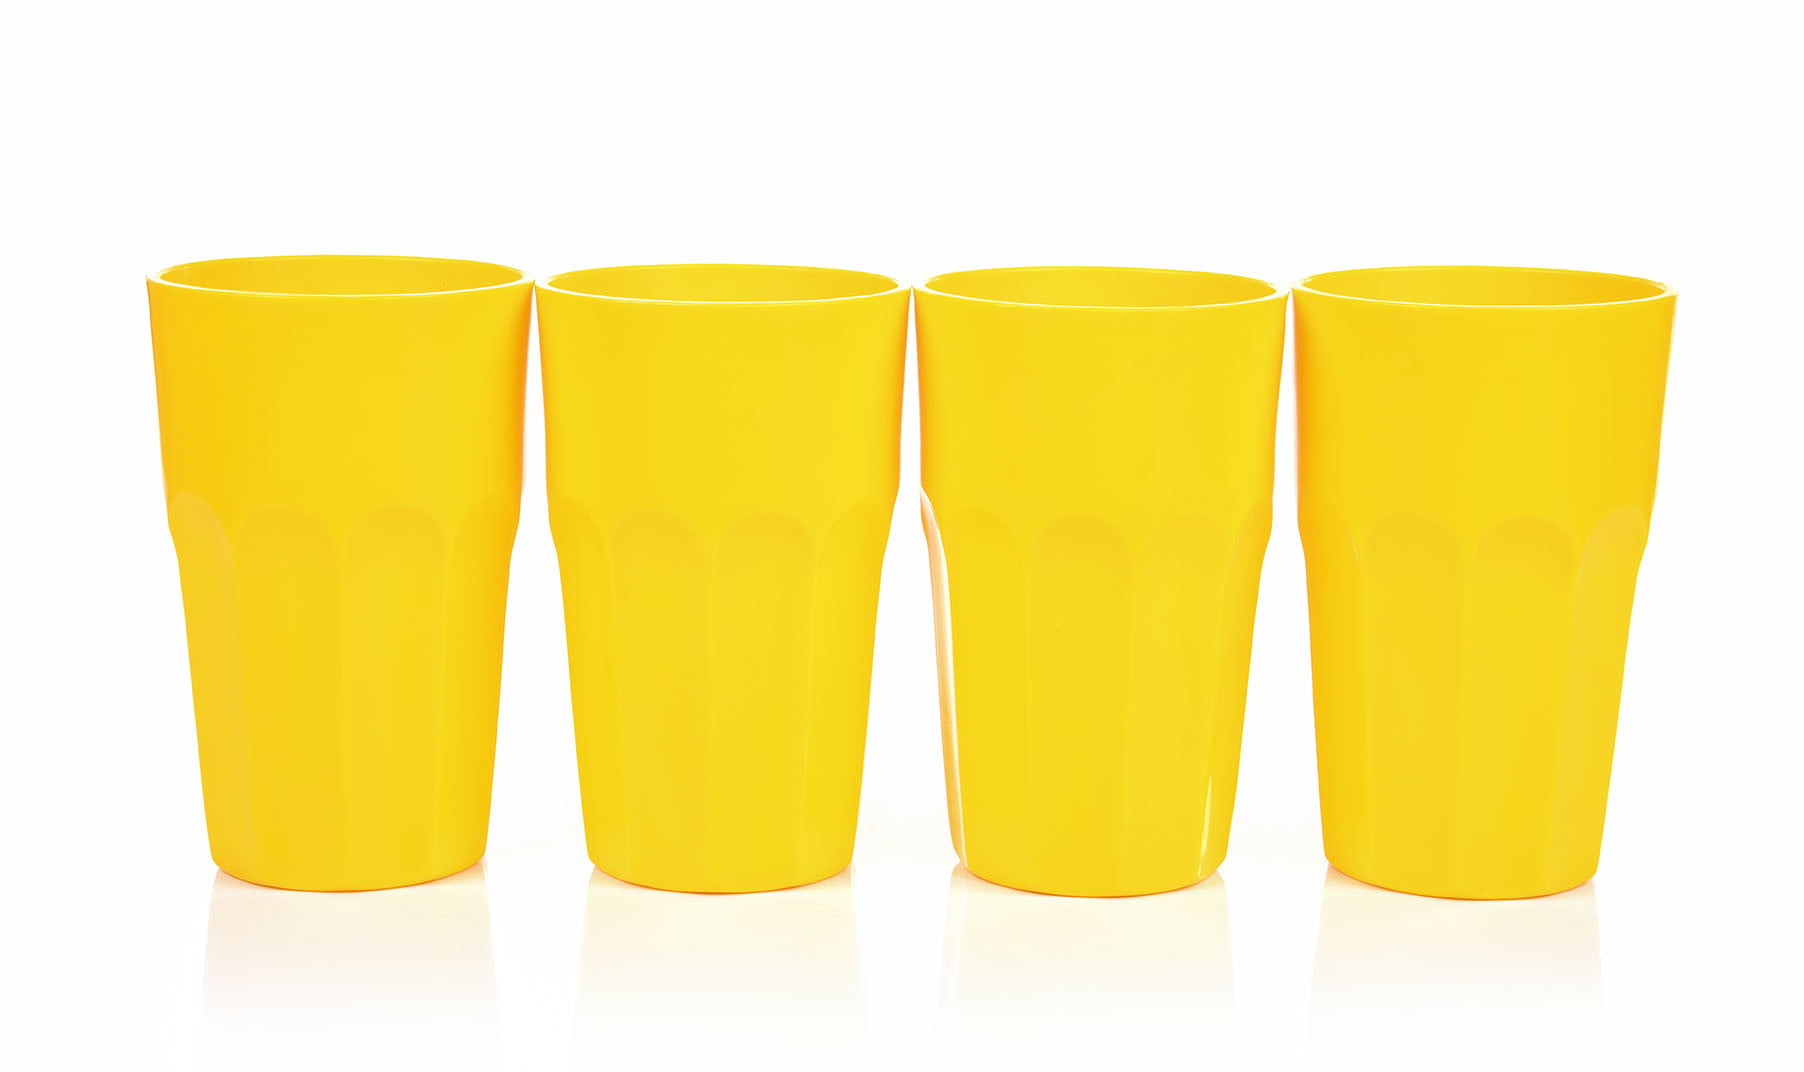 Mintra Home Unbreakable Tumblers 4 Pack (Large - 15oz, Yellow)